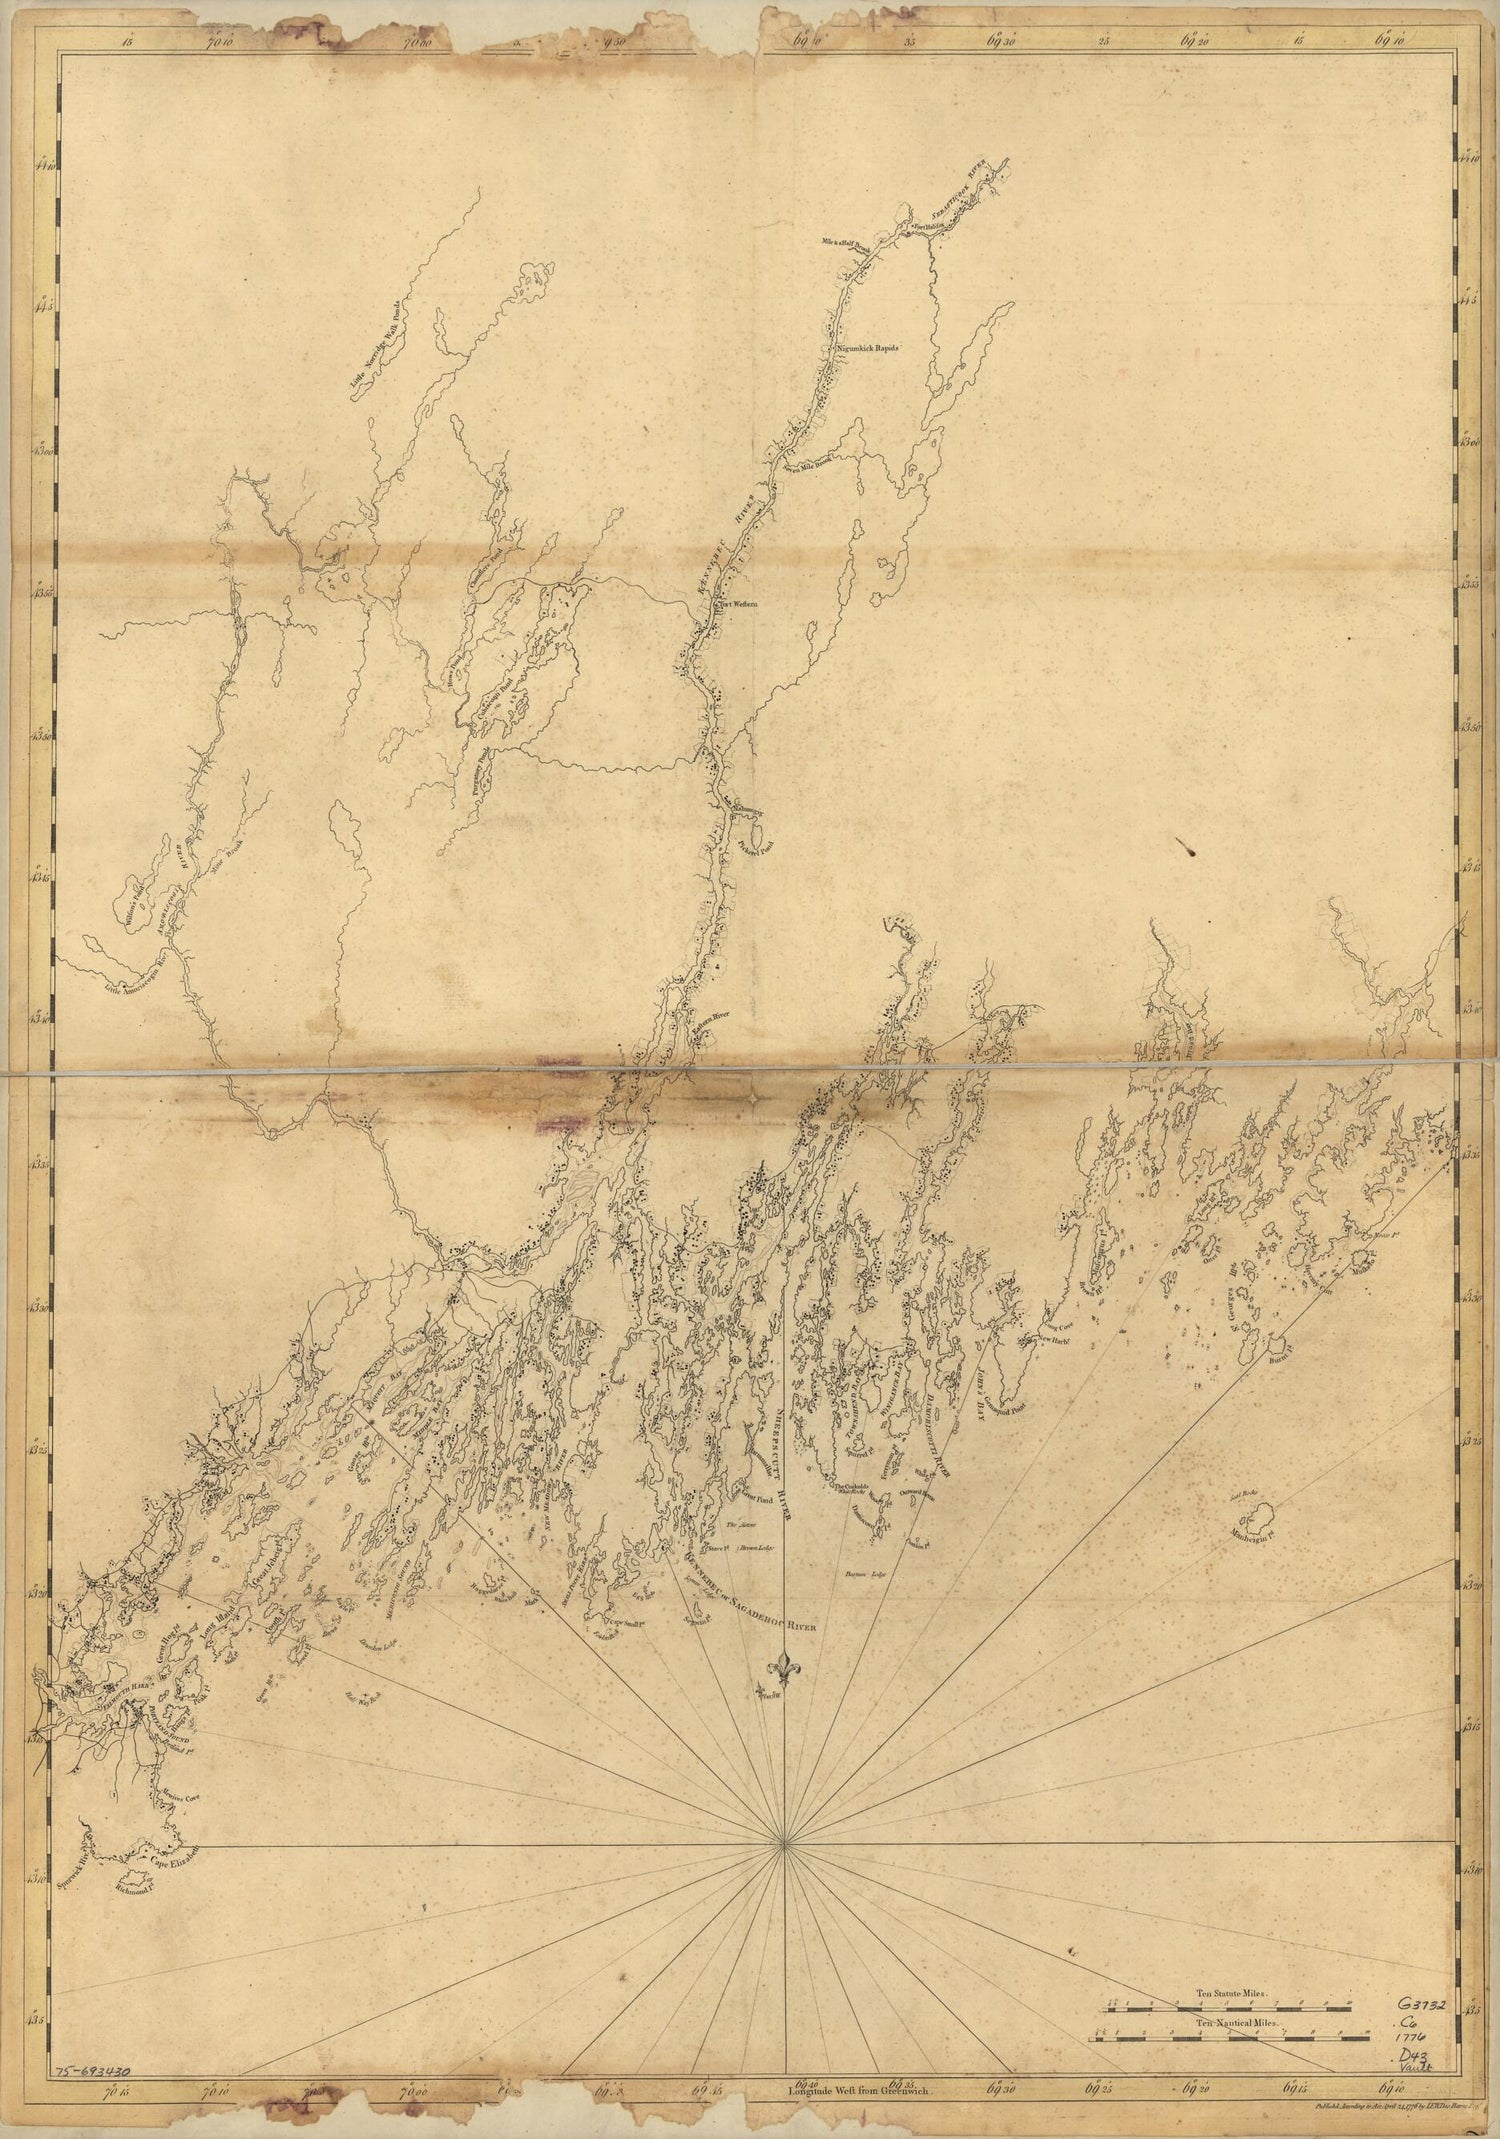 This old map of Coast of Maine from Mosquito Head to Spurwink River from 1776 was created by Joseph F. W. (Joseph Frederick Wallet) Des Barres in 1776